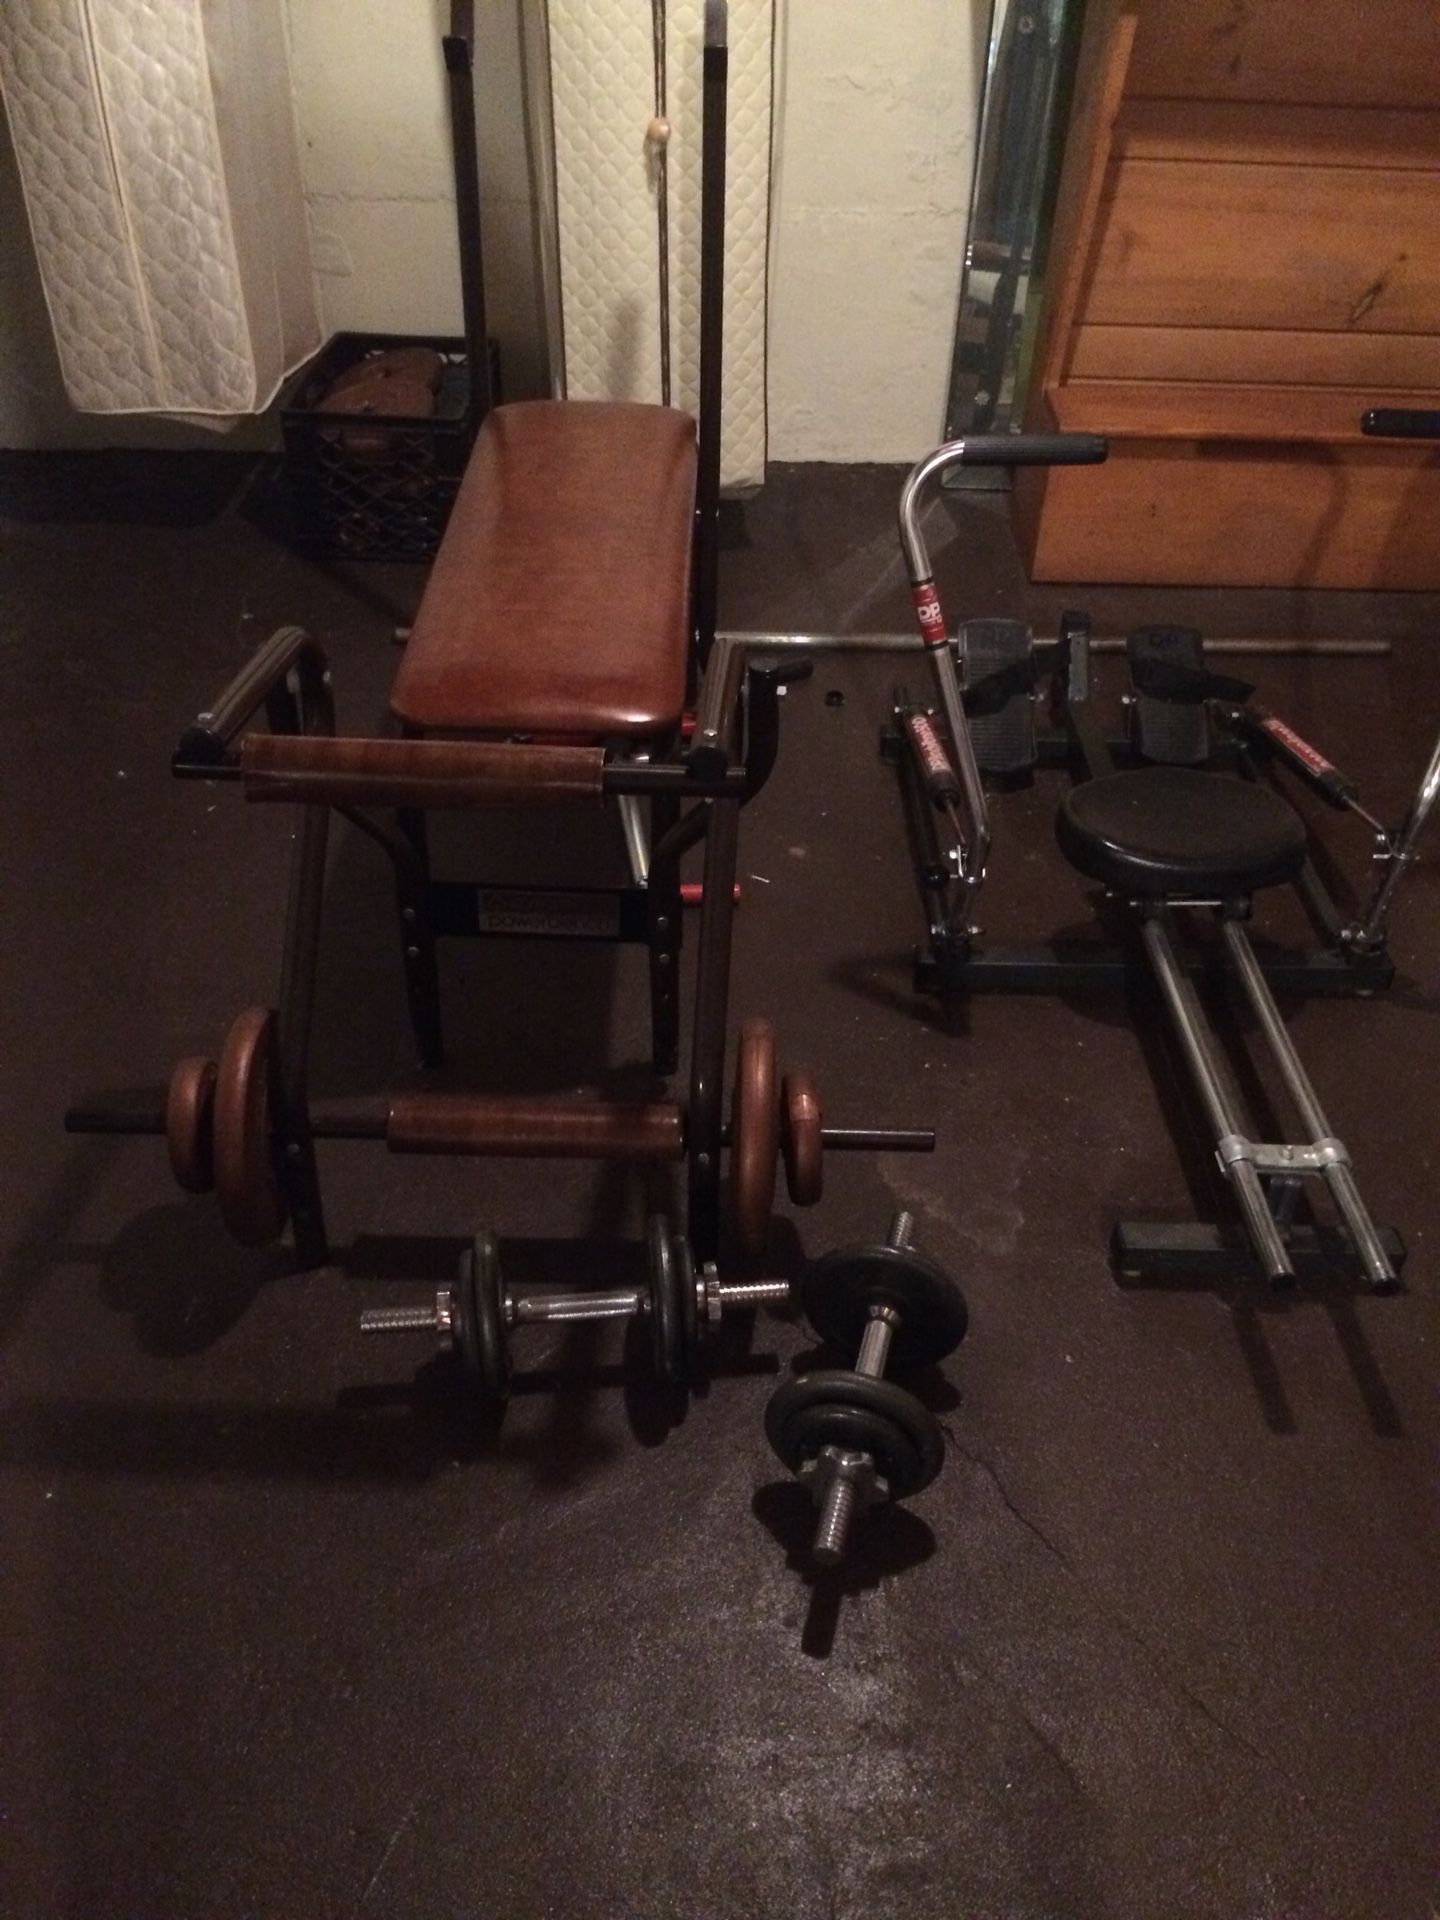 WeightBench weights and rowing machine